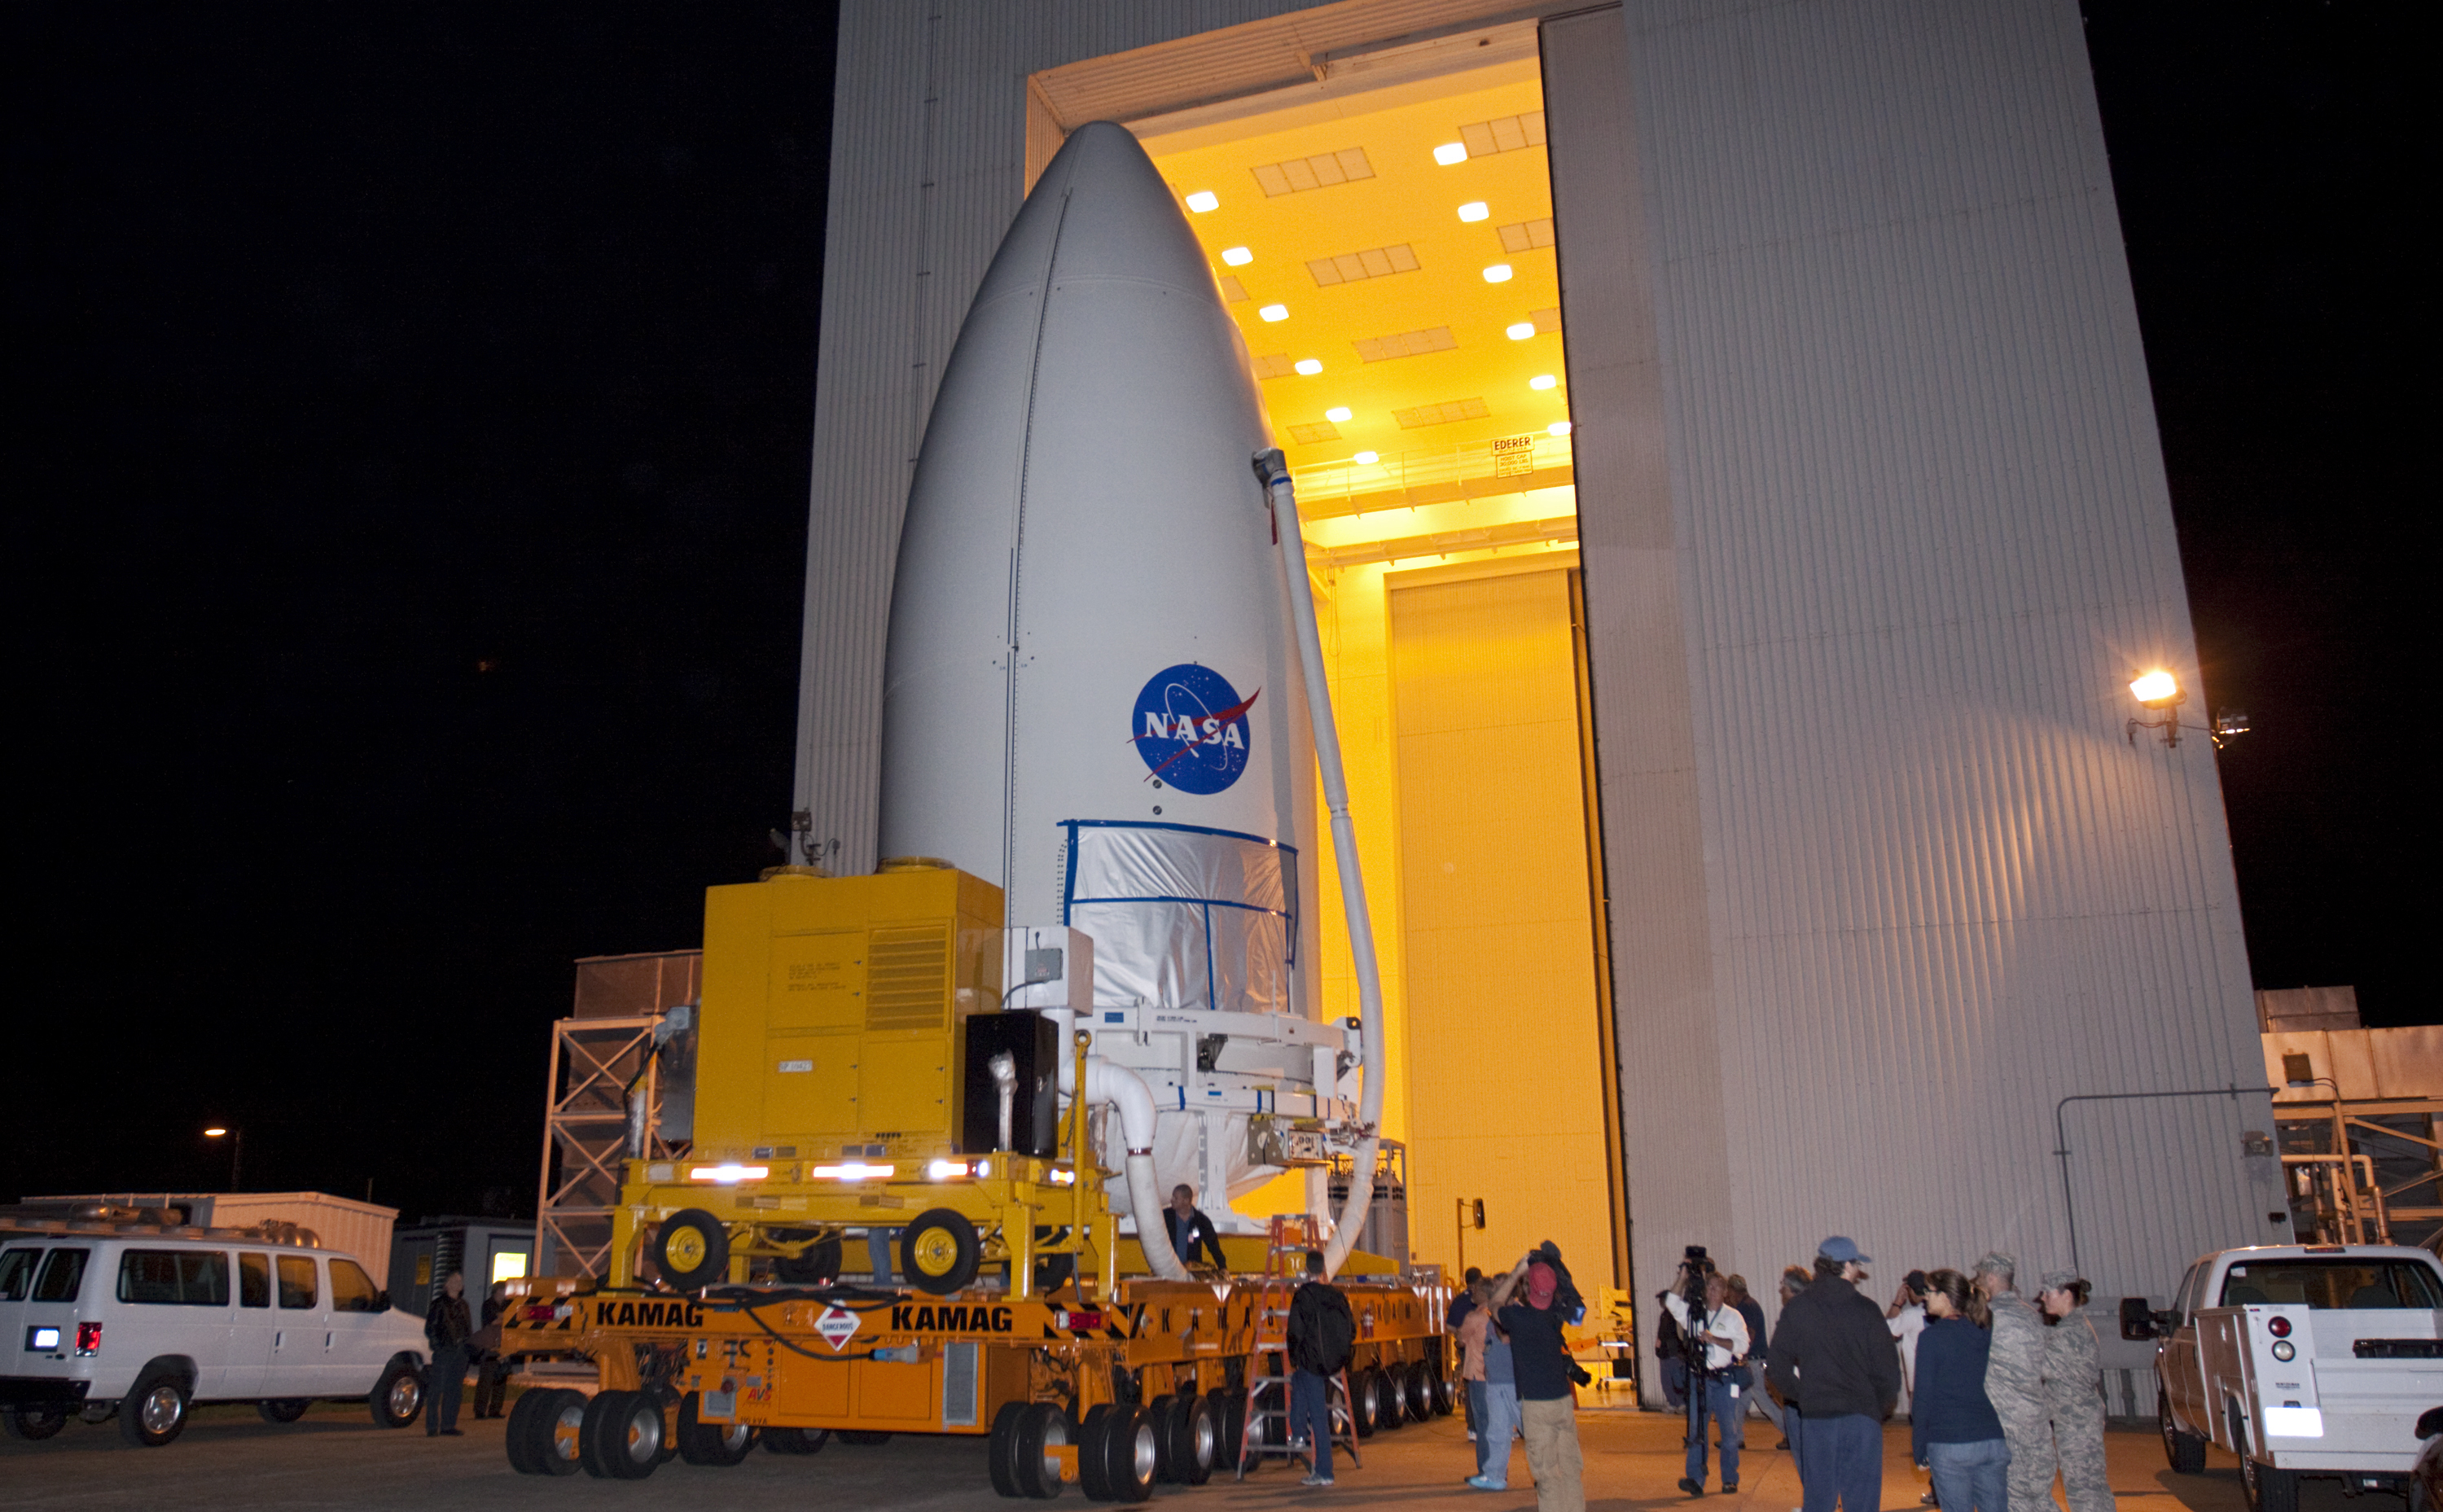 Standing atop a payload transporter, the Atlas V rocket payload fairing containing NASA's Mars Science Laboratory (MSL) spacecraft rolls out of the Payload Hazardous Servicing Facility at Kennedy Space Center in Florida, beginning the move to Space Launch Complex 41.